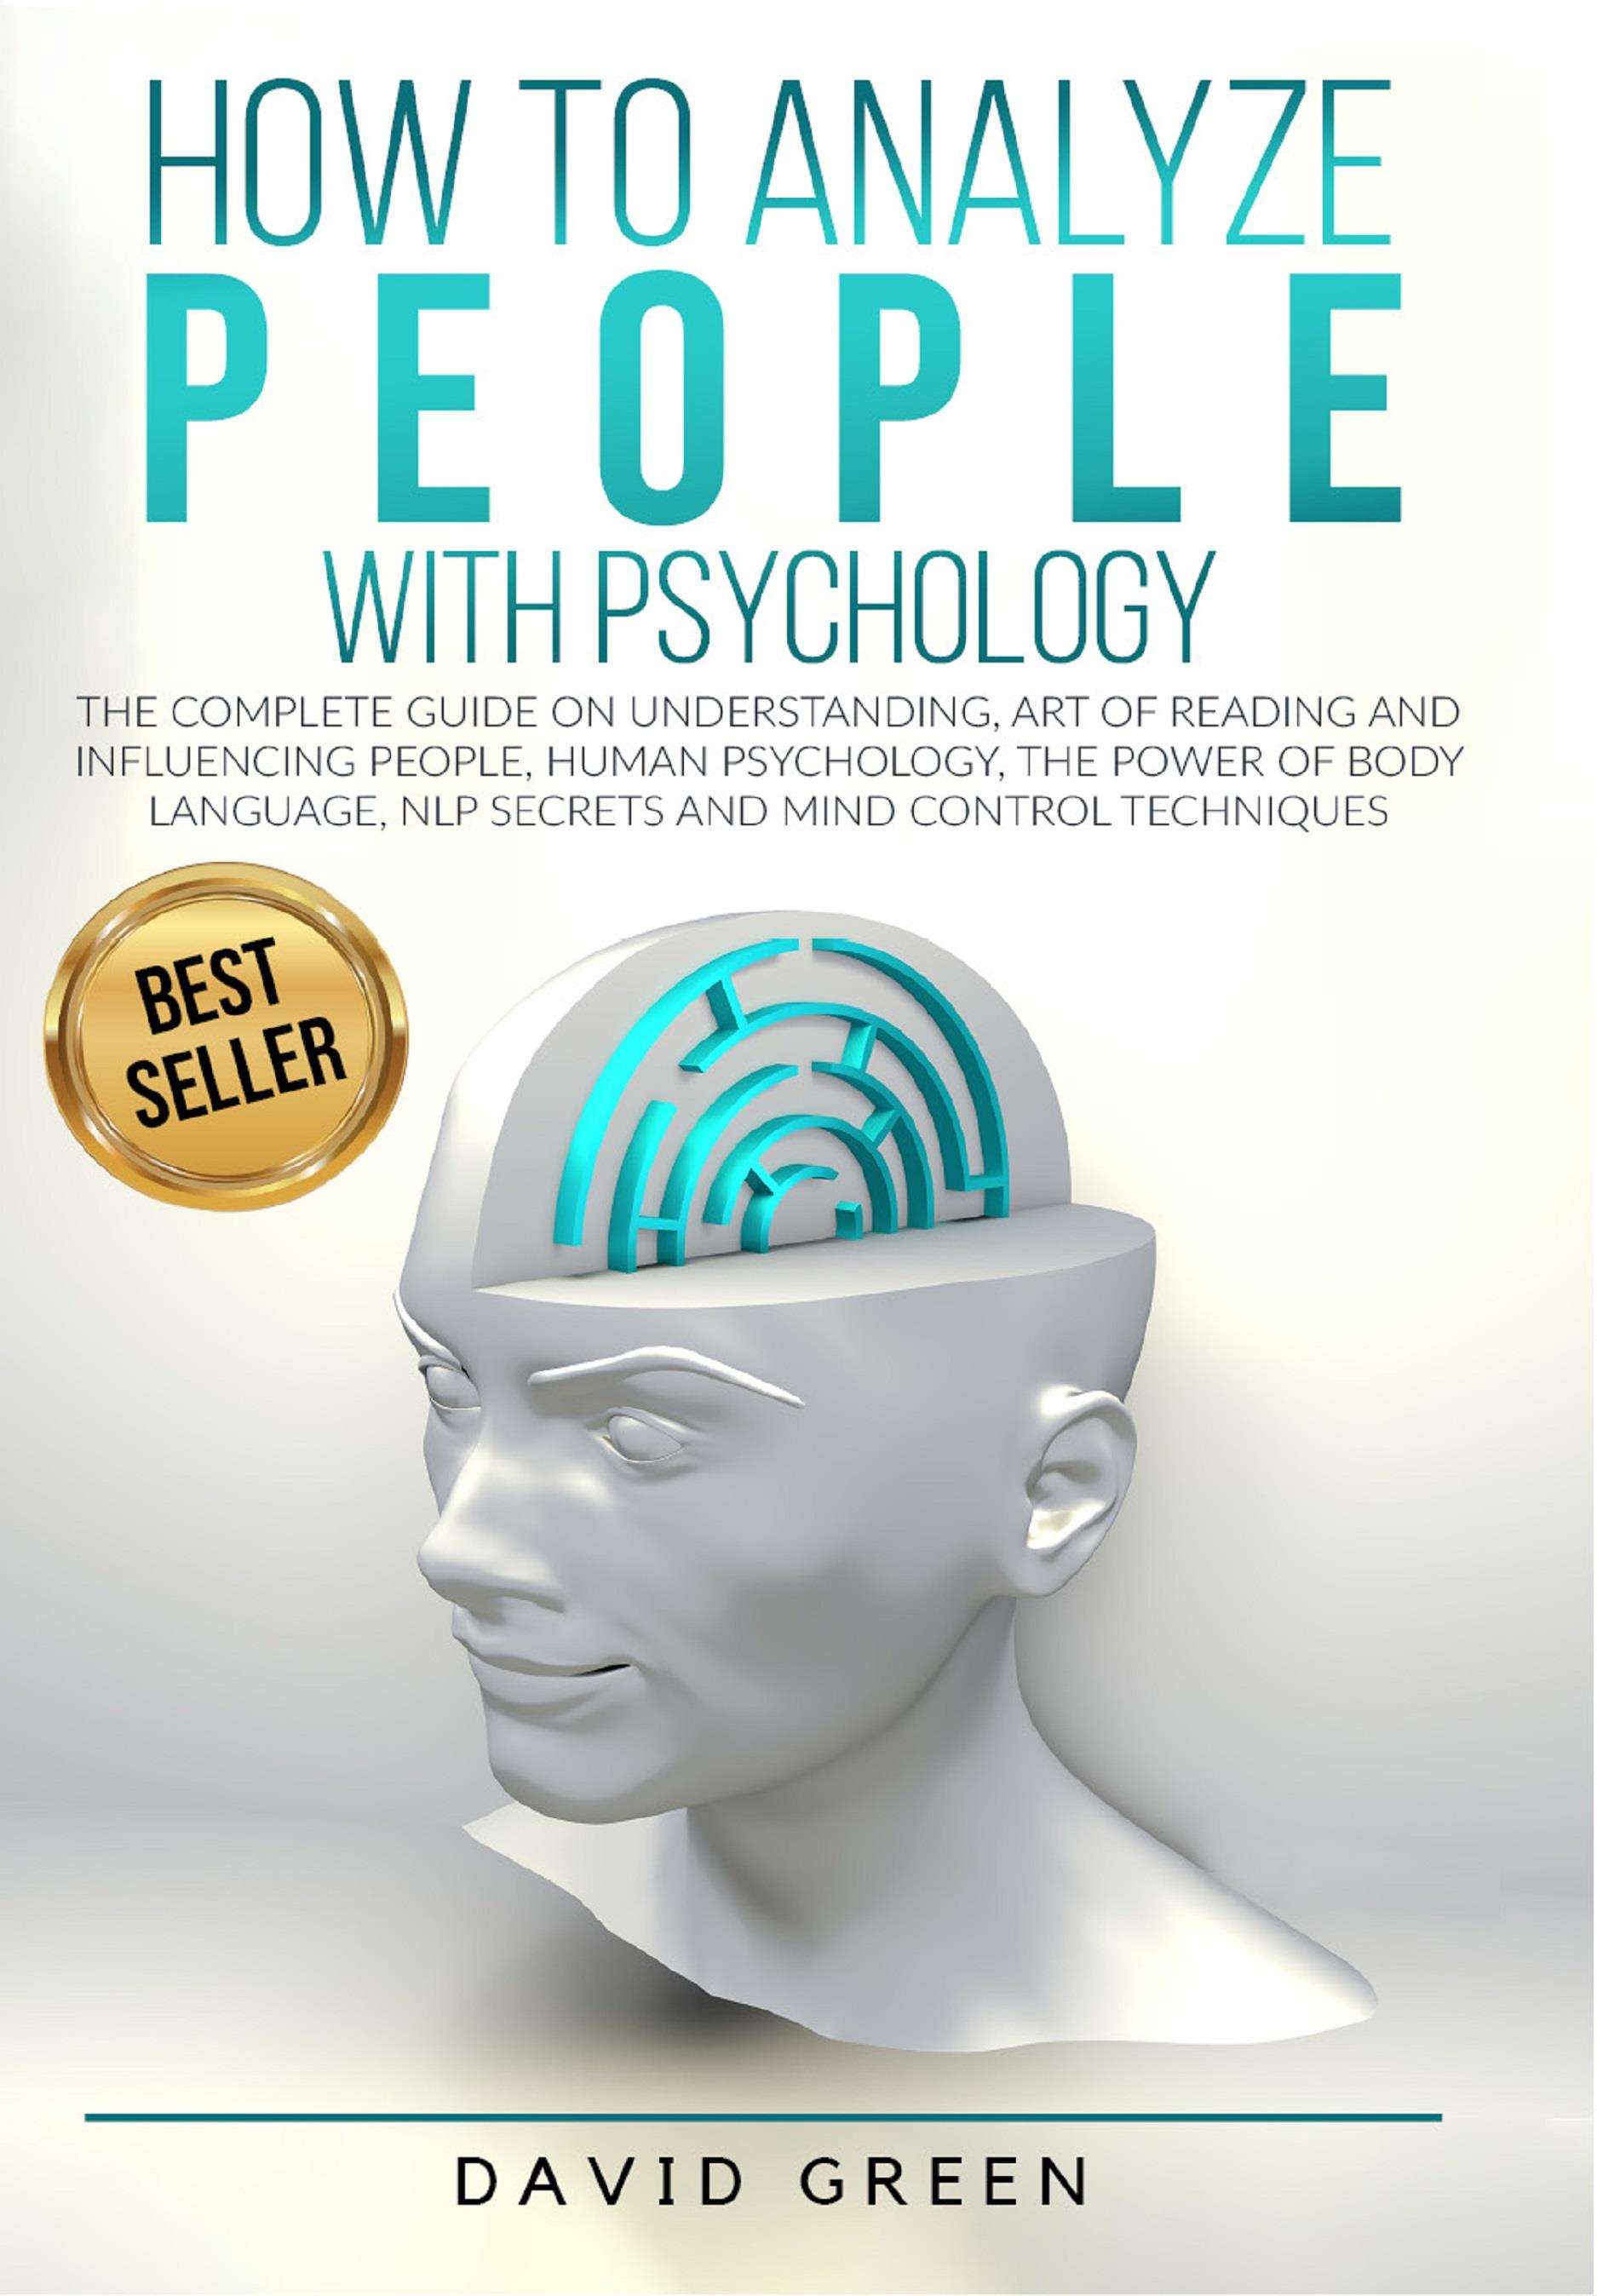 How to analyze people with psychology